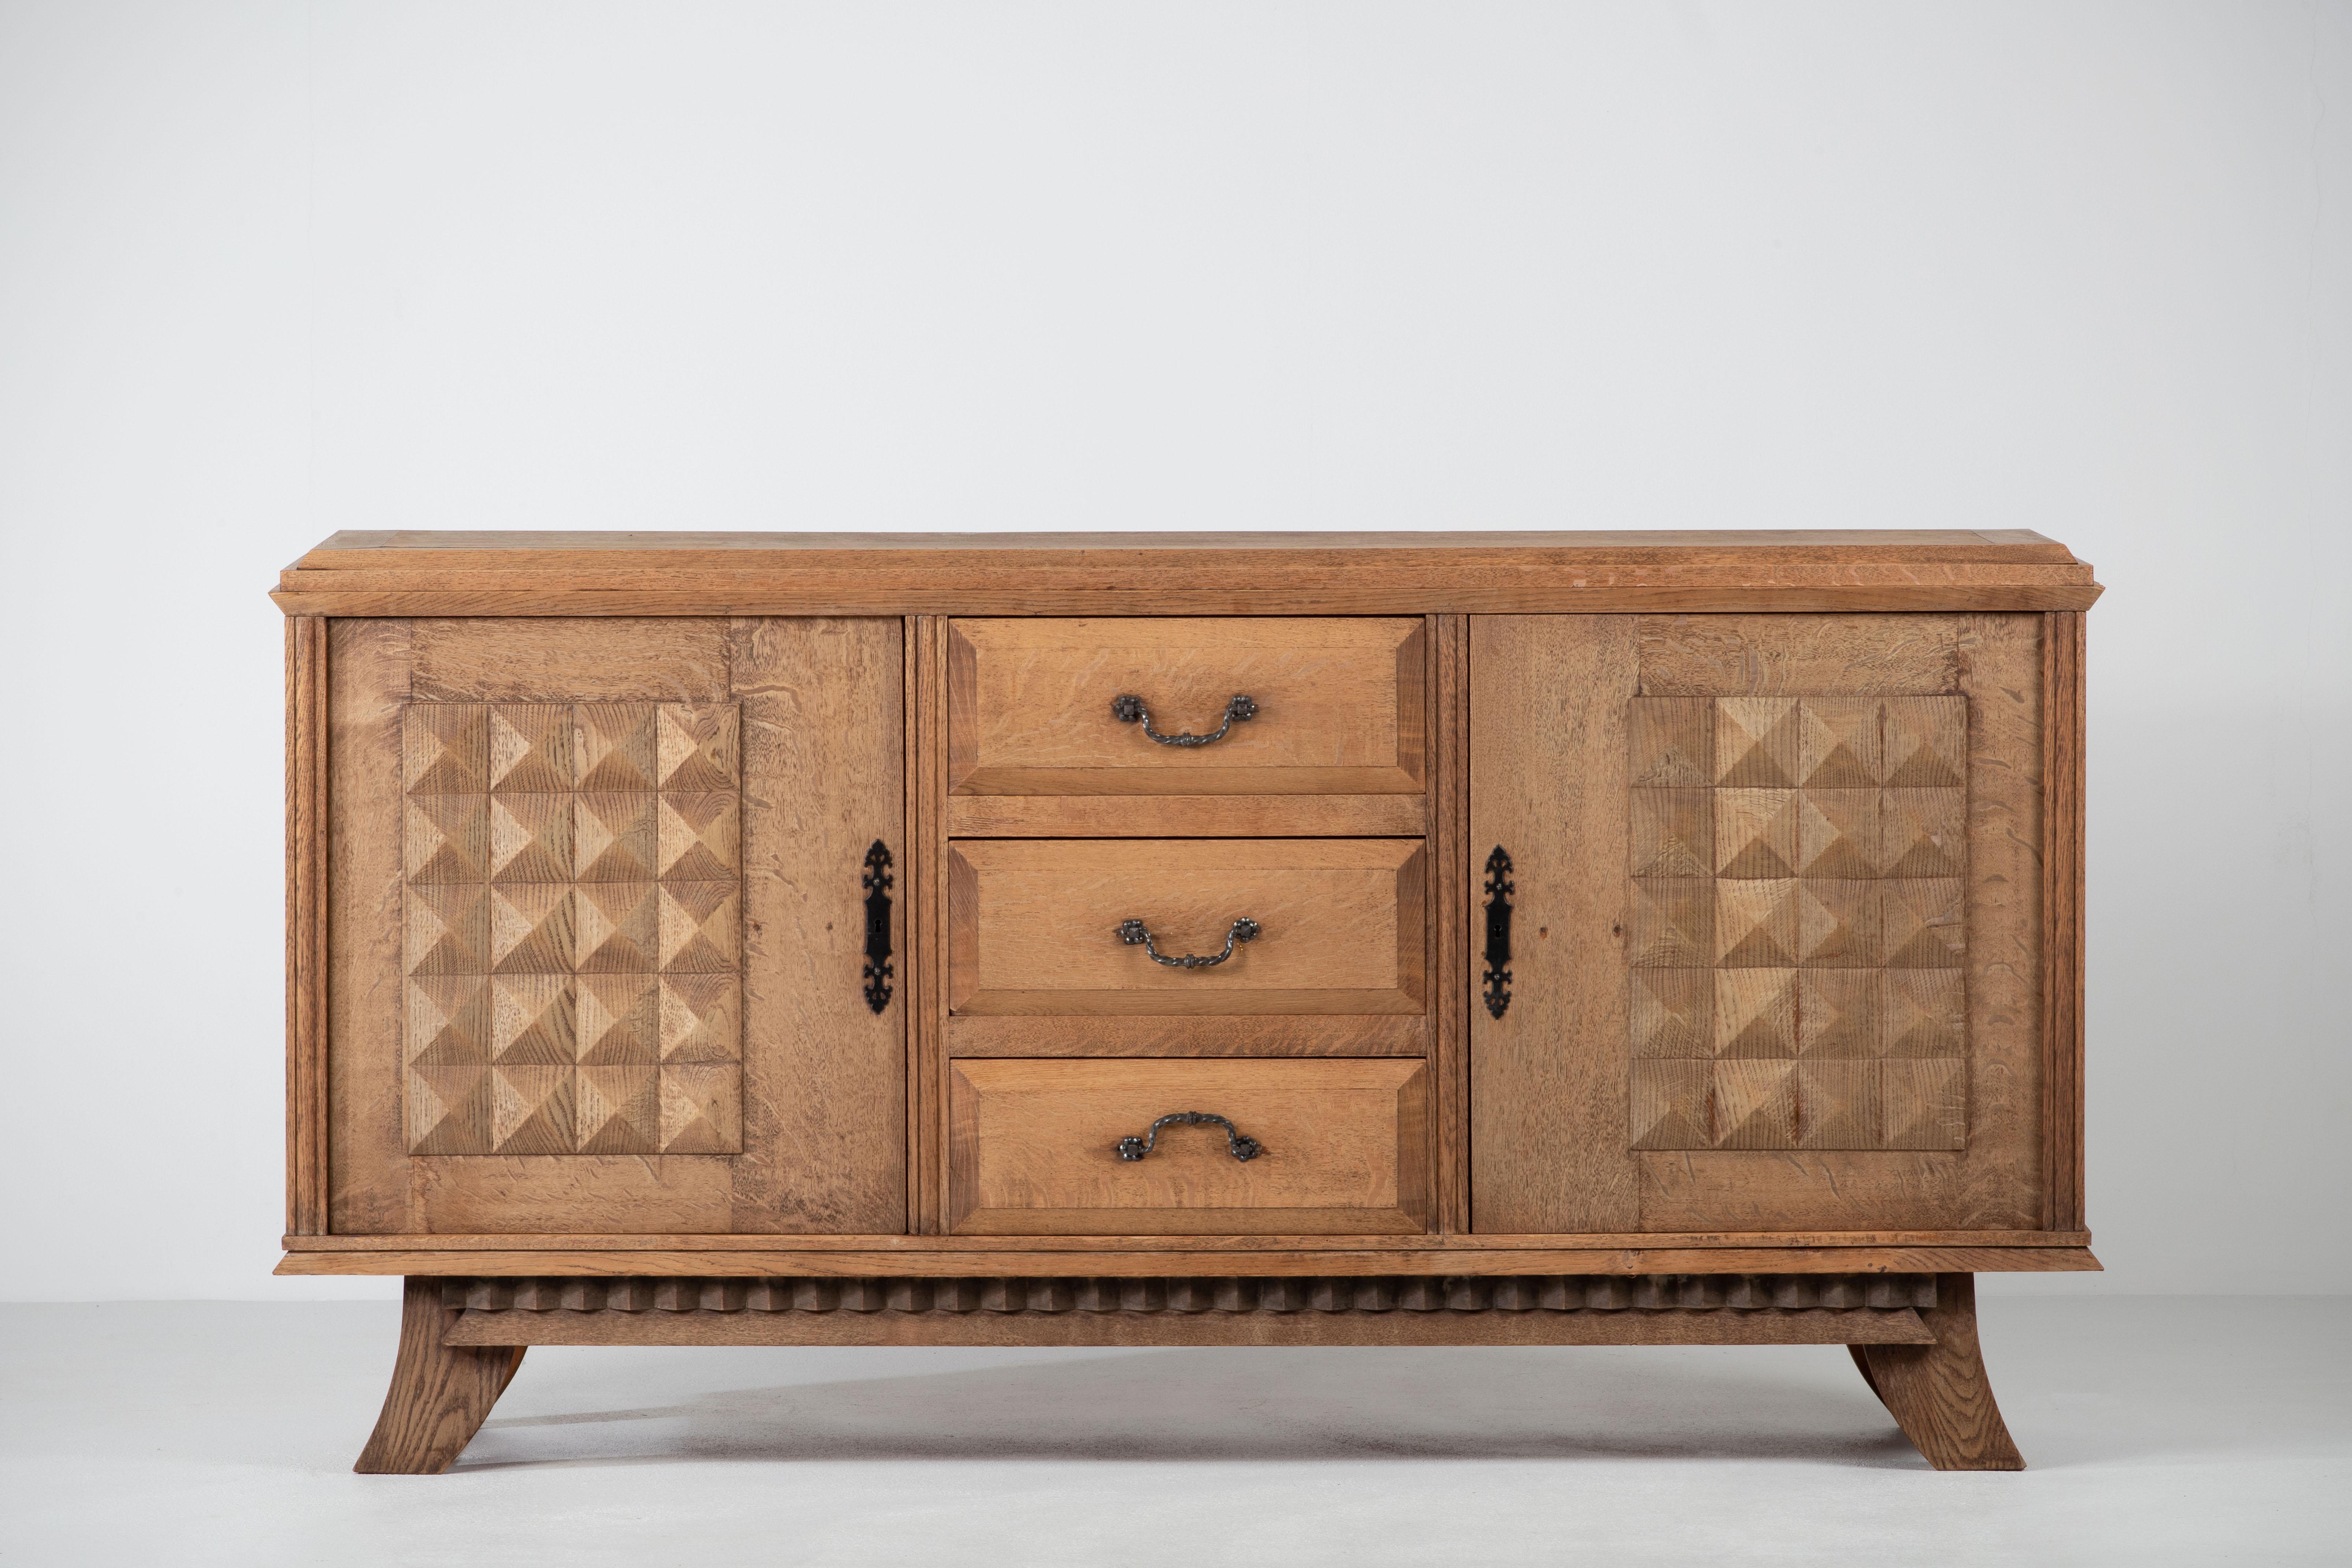 Large Credenza, solid oak, France, reminiscent of the work of Charles Dudouyt, 1940s.
Large Art Deco Brutalist sideboard. 
The credenza consists of two storage facilities and covered with very detailed designed doors, in the center, drawers.
The